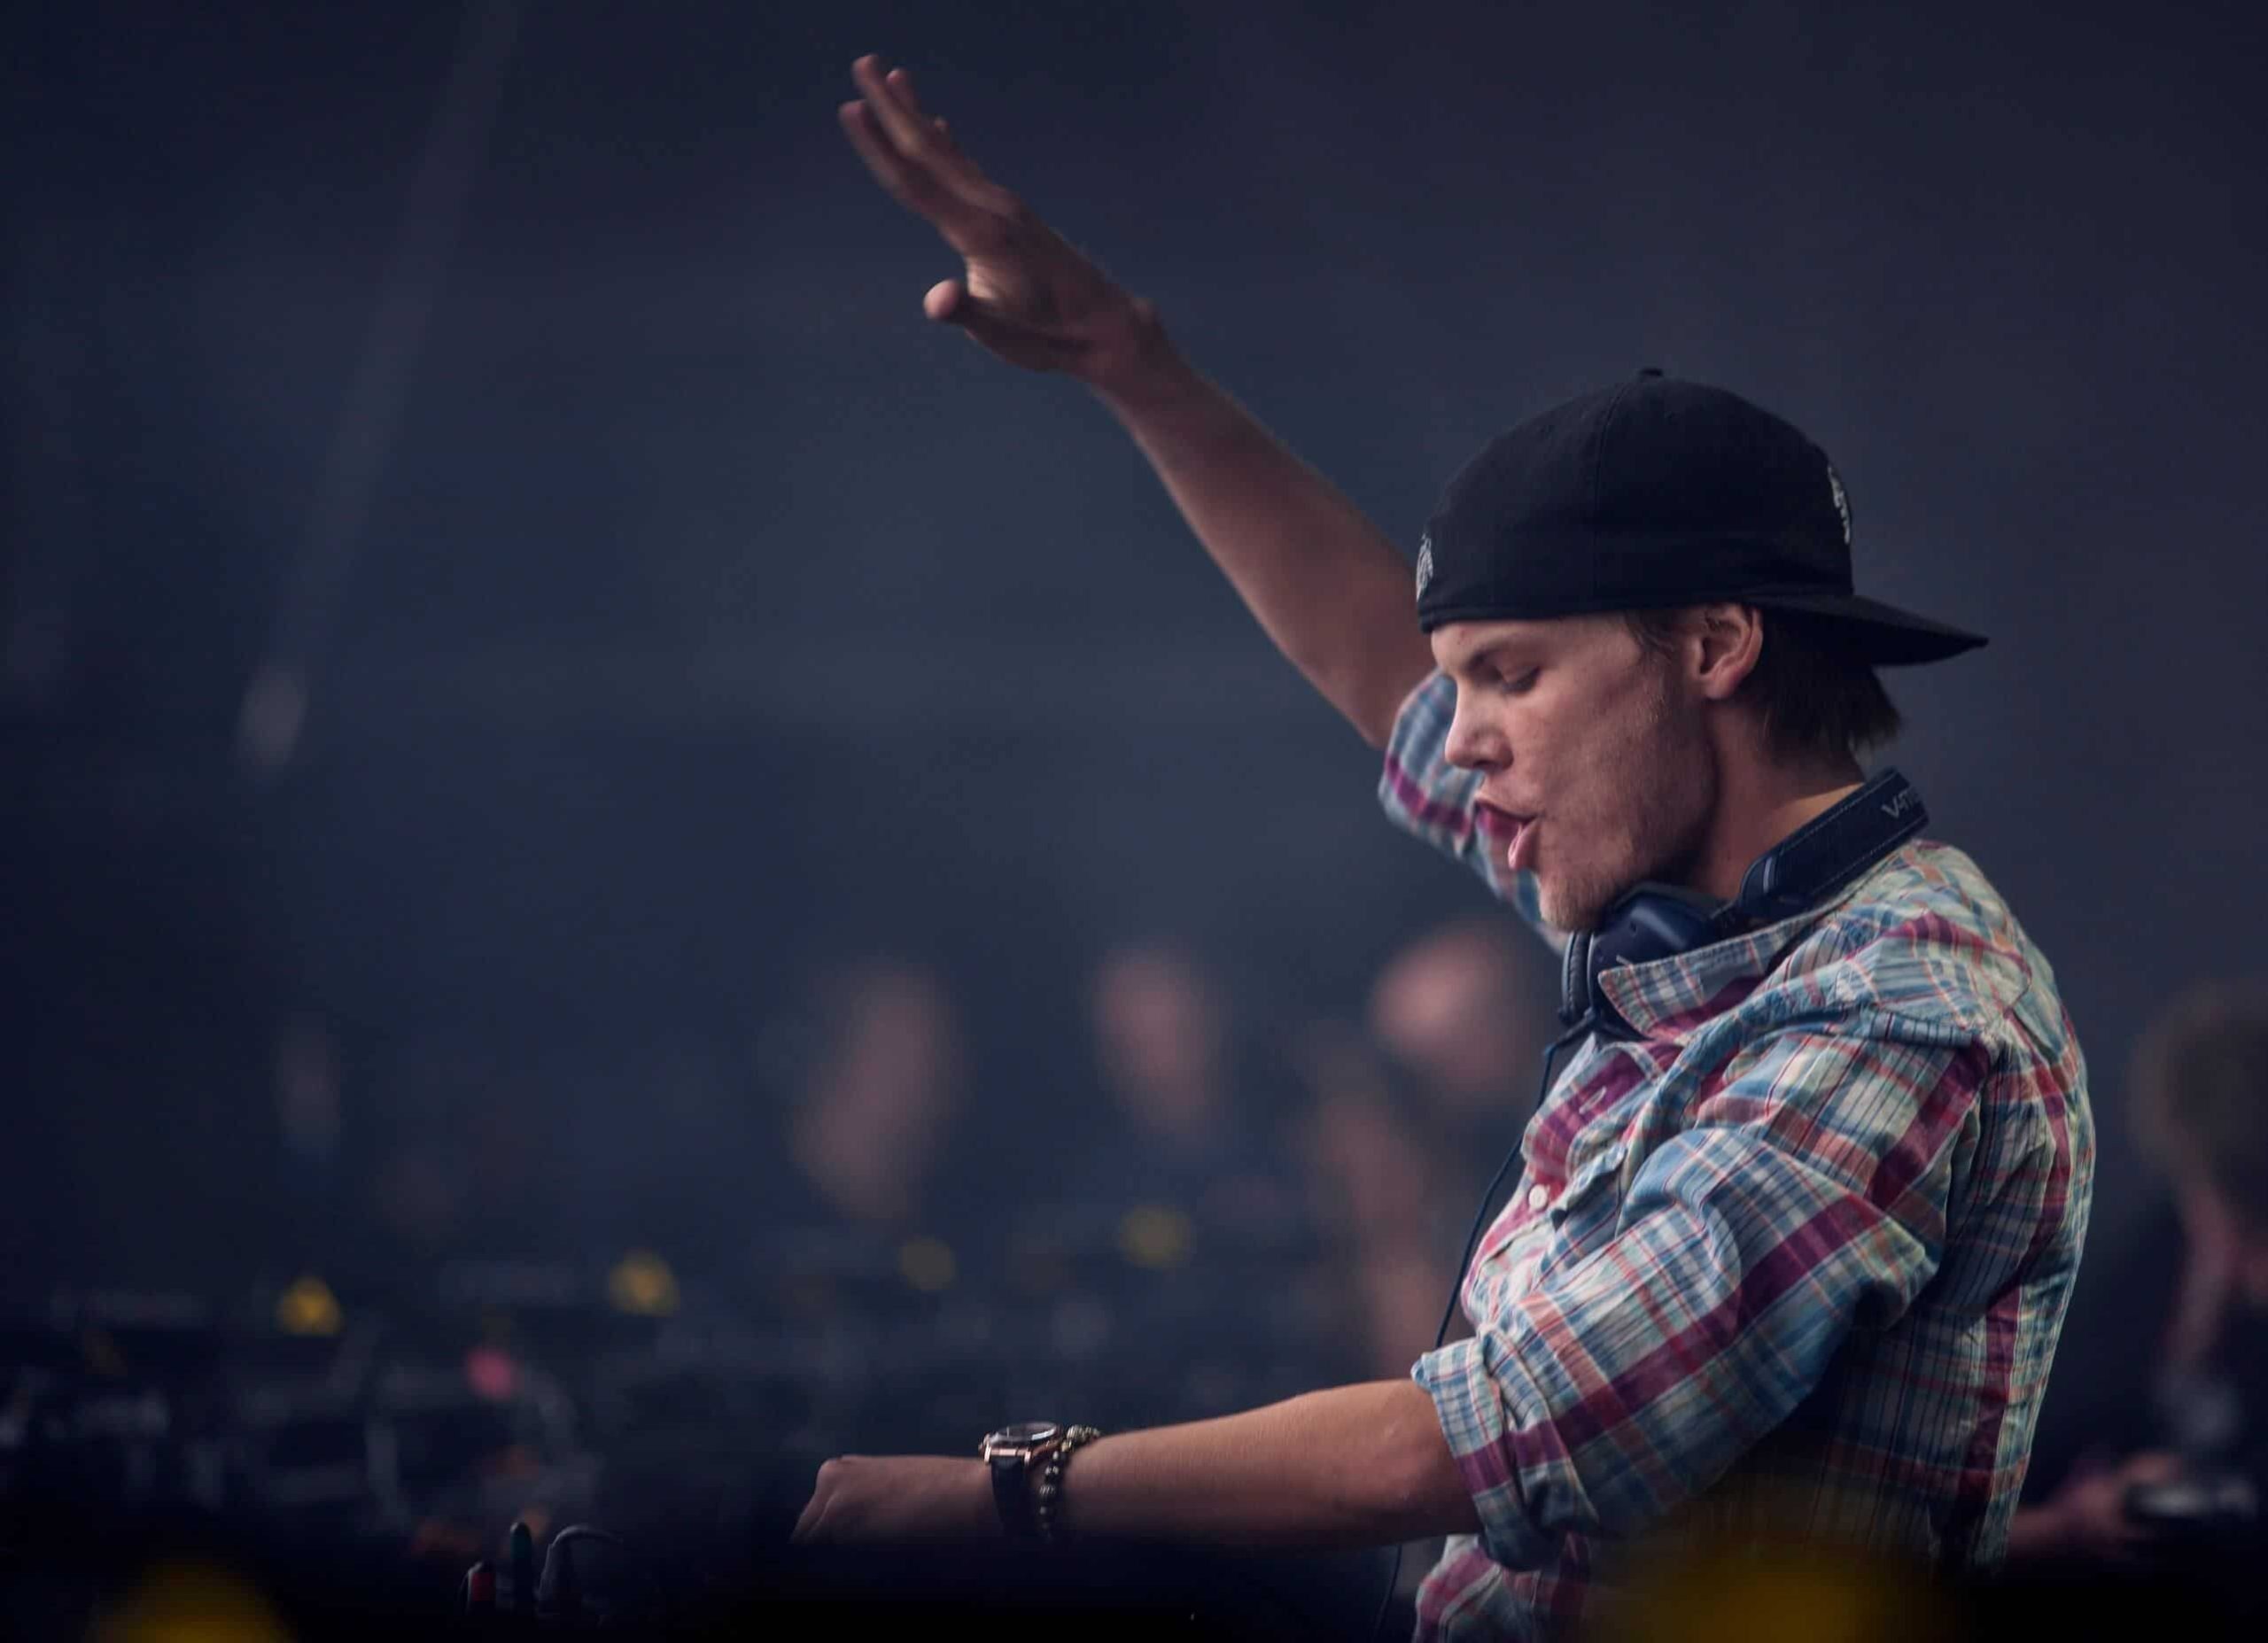 10 Avicii moments that changed dance music forever